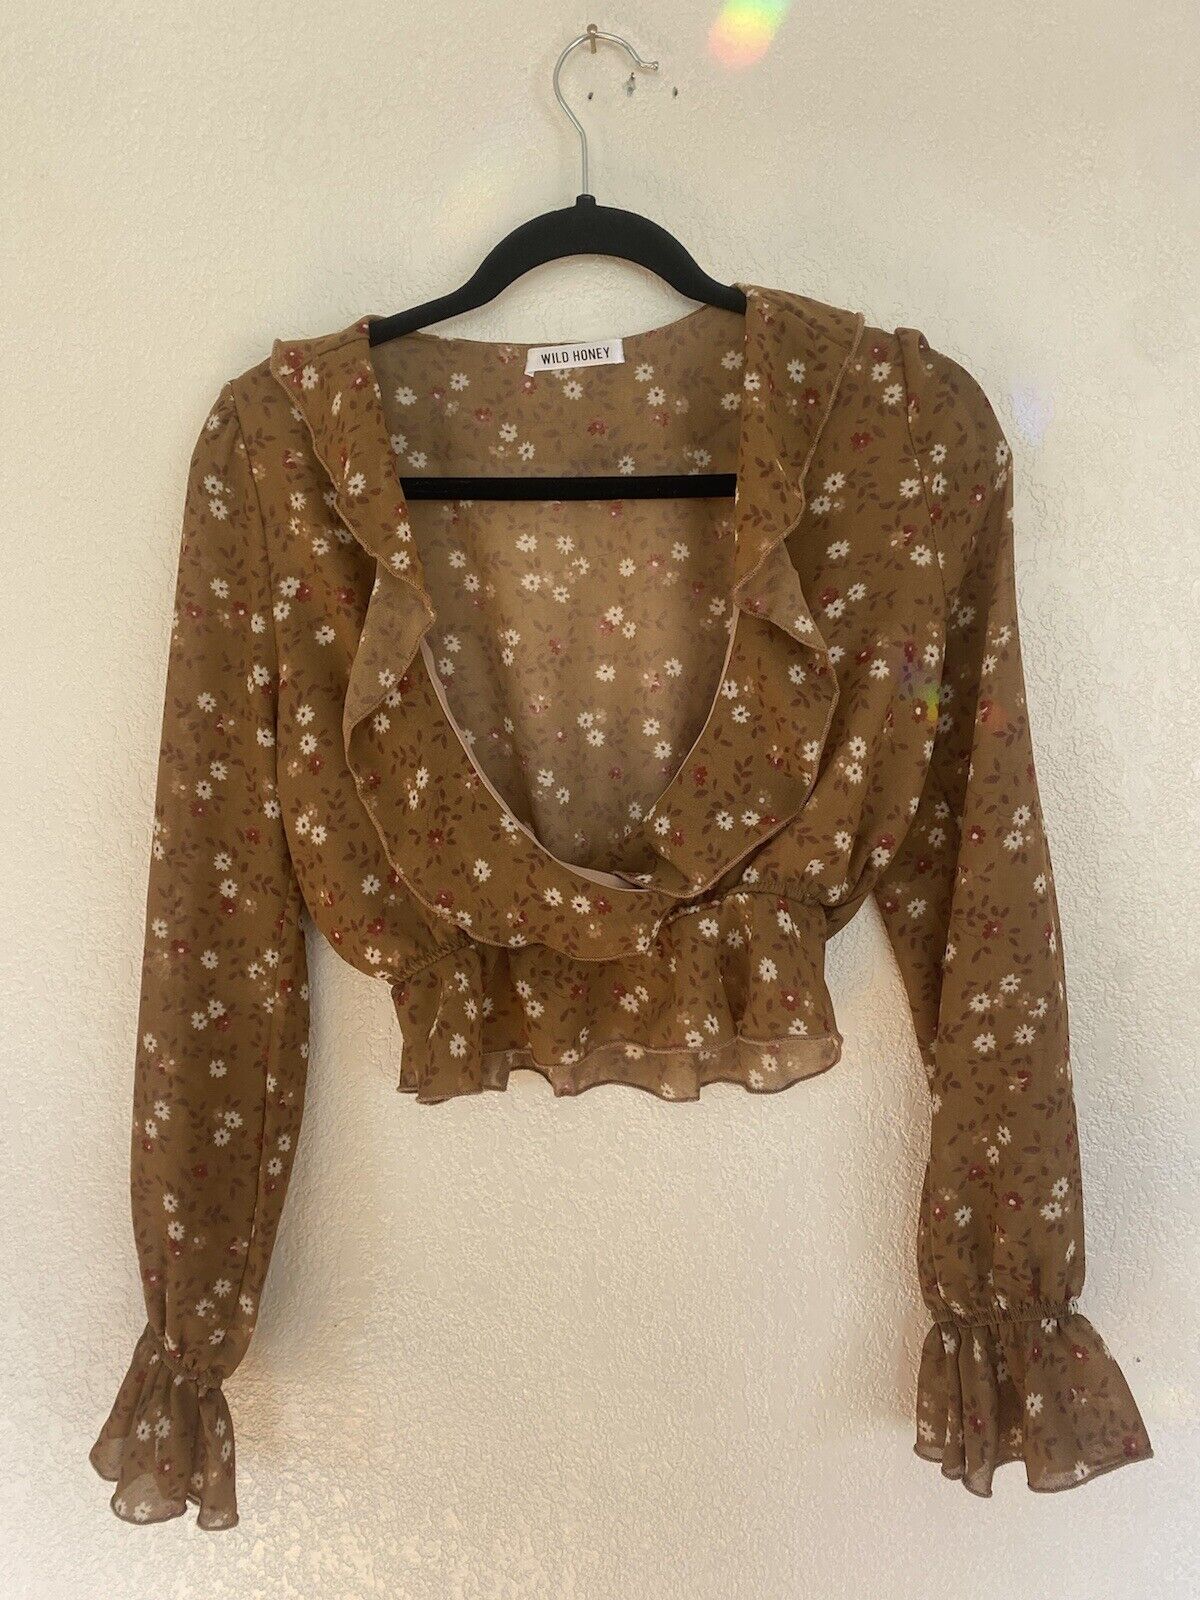 Earthy Floral Top - Wild Honey - Women's Small # 2186